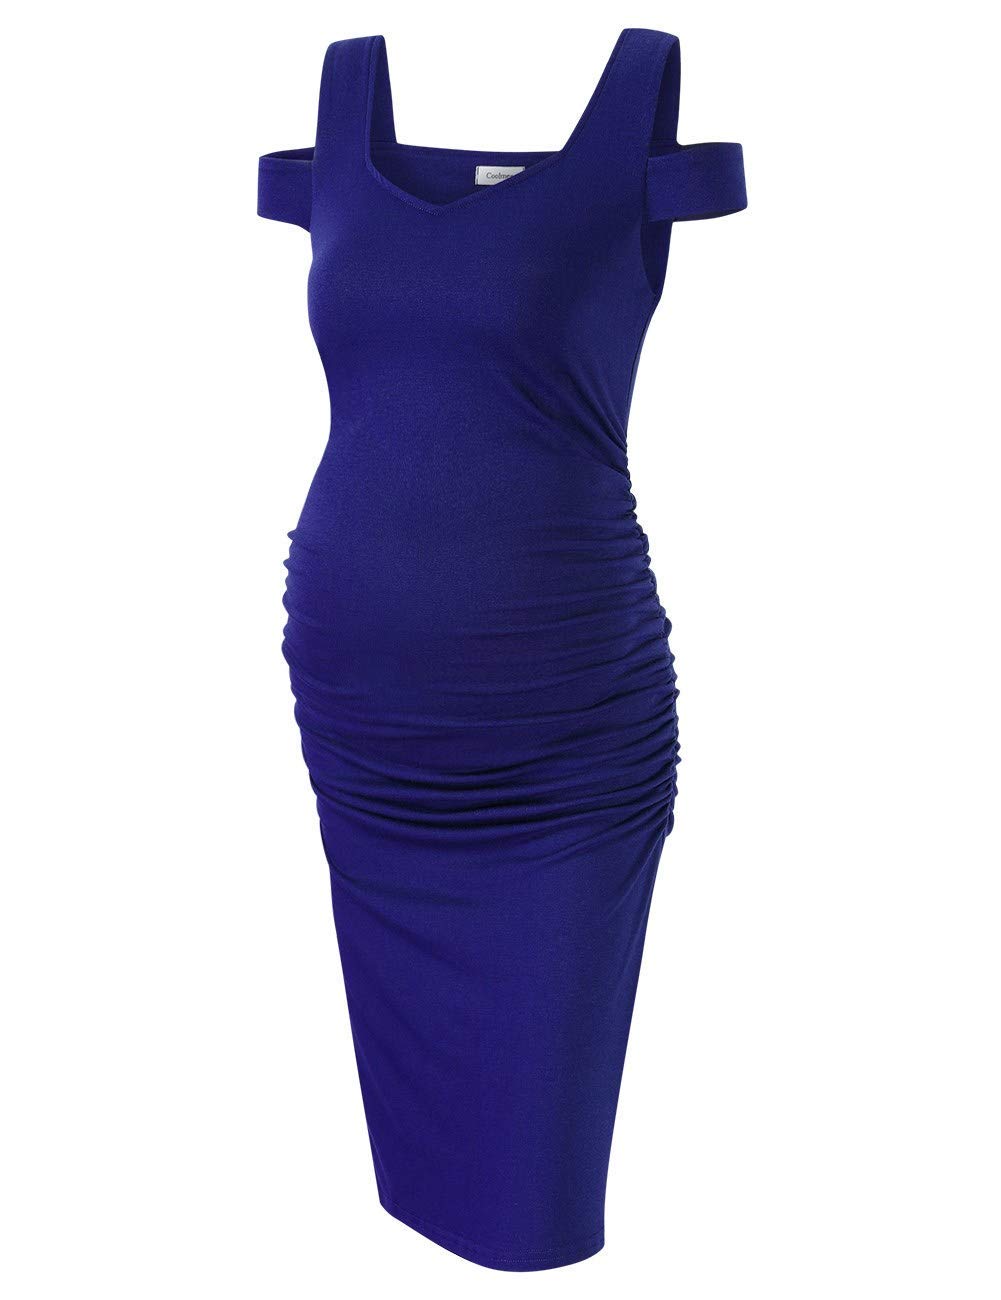 Maternity Dress Women's Casual V Neck Sleeveless Solid Color Ruched Knee-Length Maternity Dresses